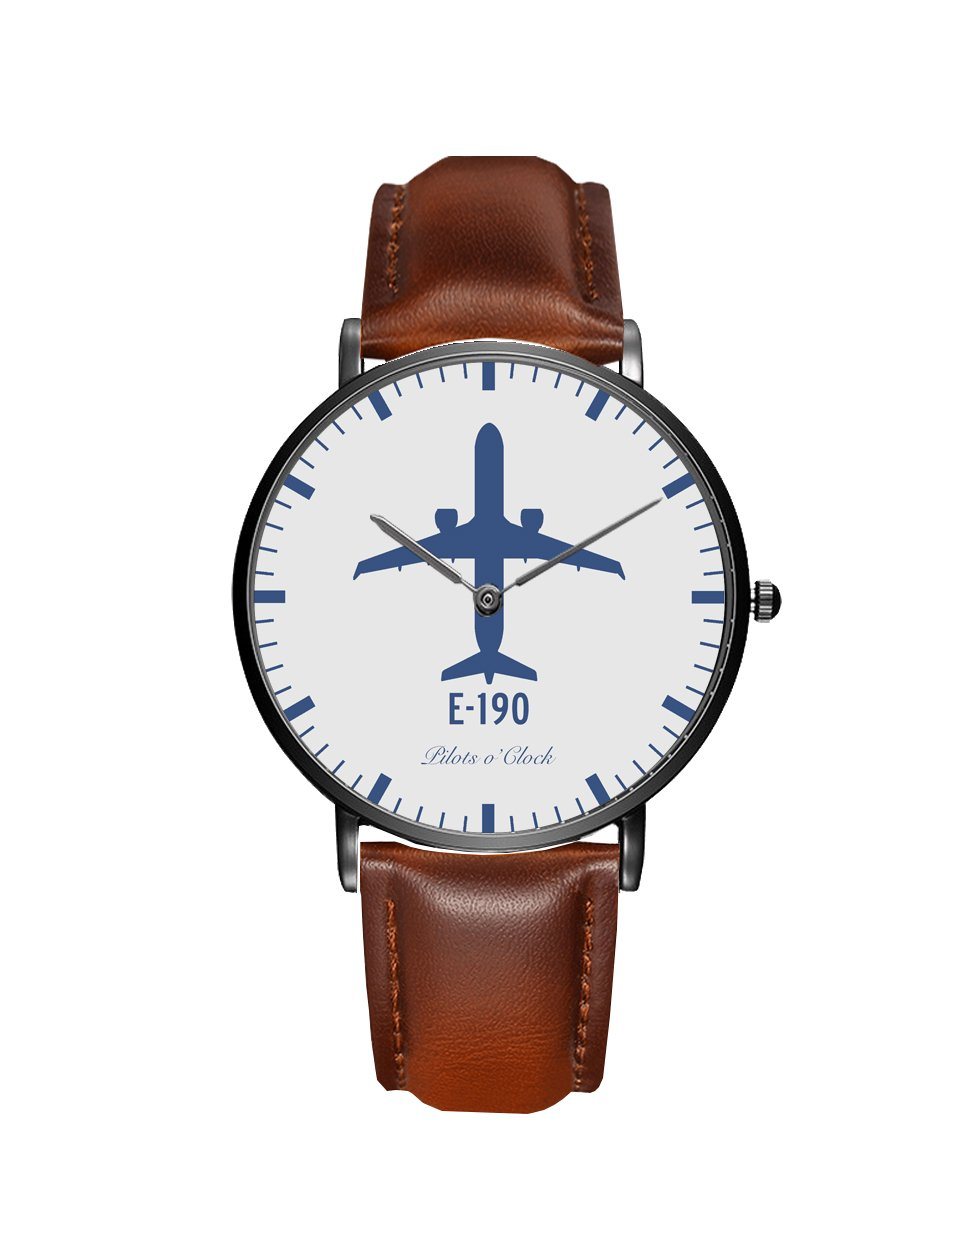 Embraer E190 Leather Strap Watches Pilot Eyes Store Black & Brown Leather Strap 